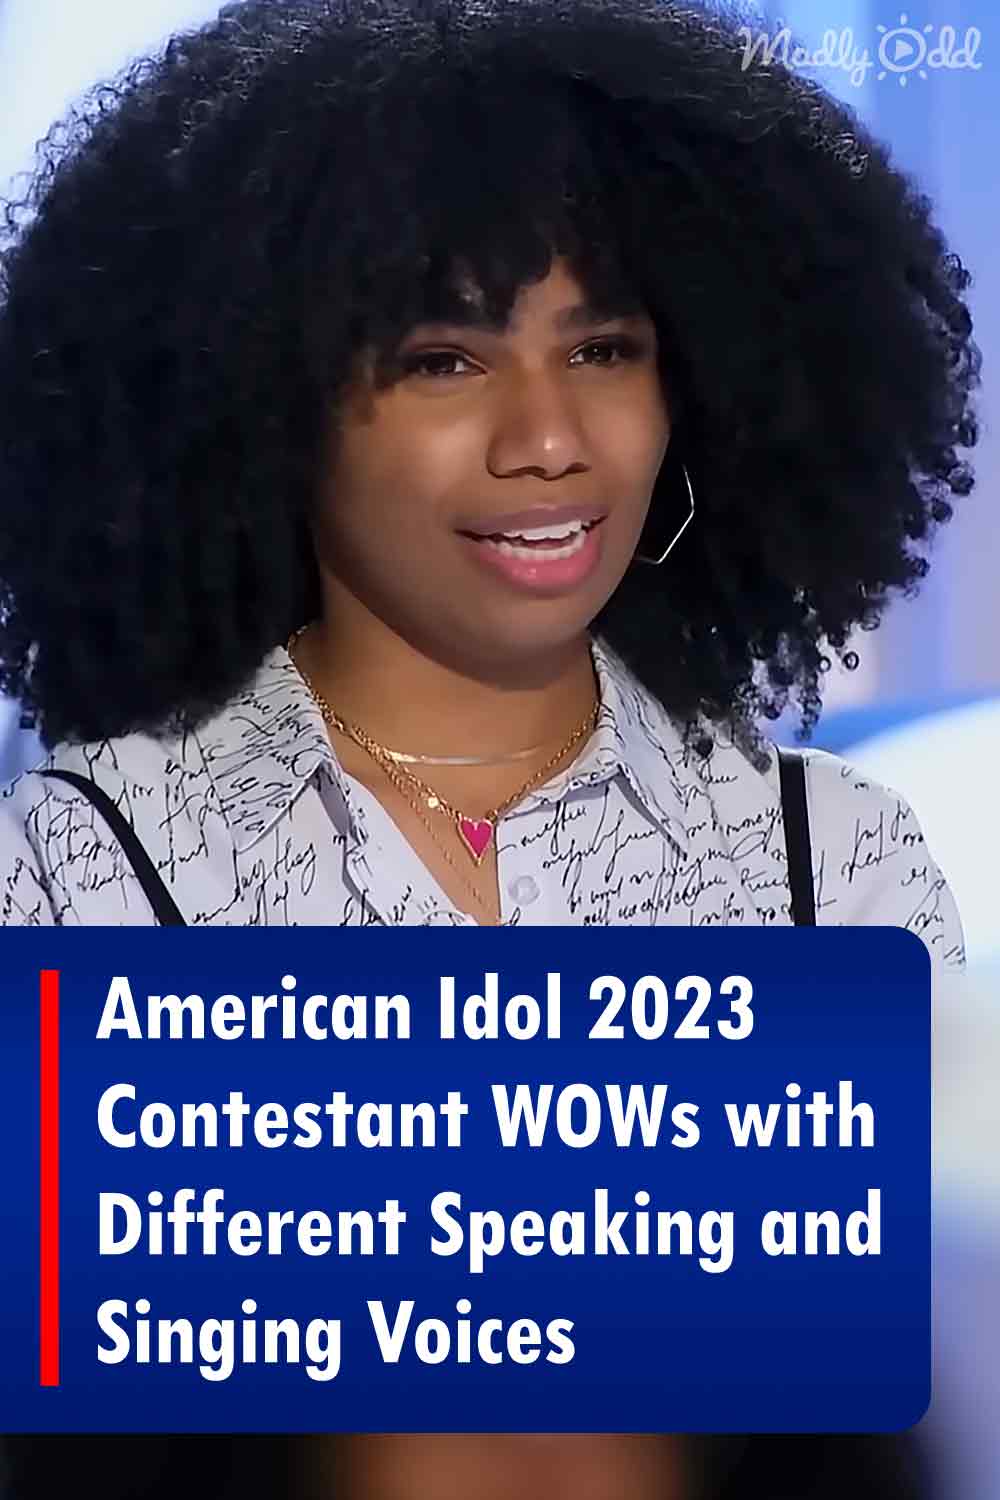 American Idol 2023 Contestant WOWs with Different Speaking and Singing Voices